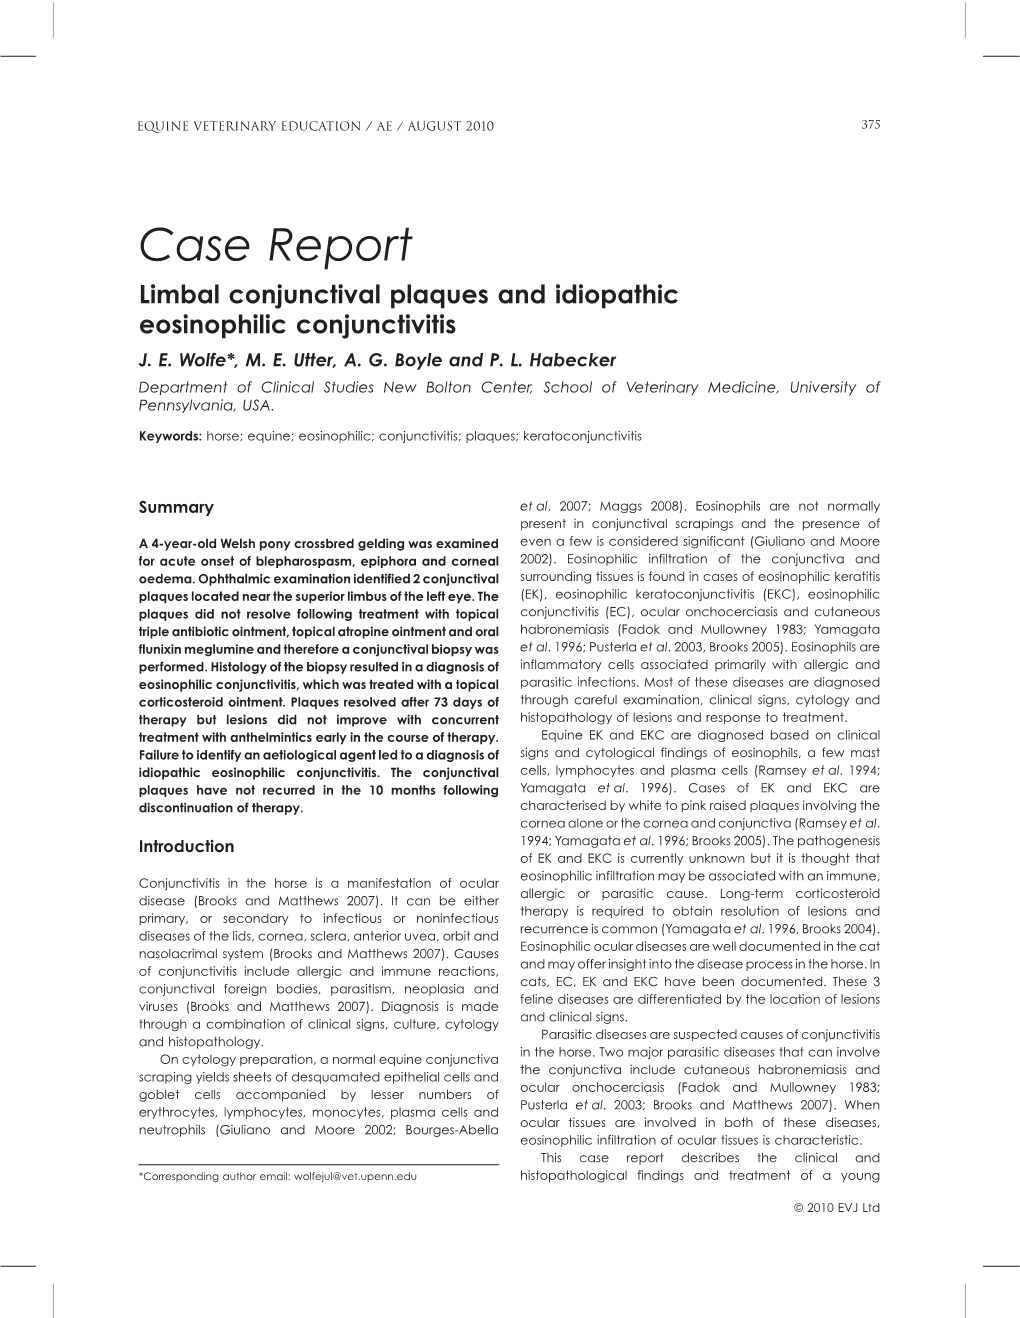 Case Report Limbal Conjunctival Plaques and Idiopathic Eosinophilic Conjunctivitis J